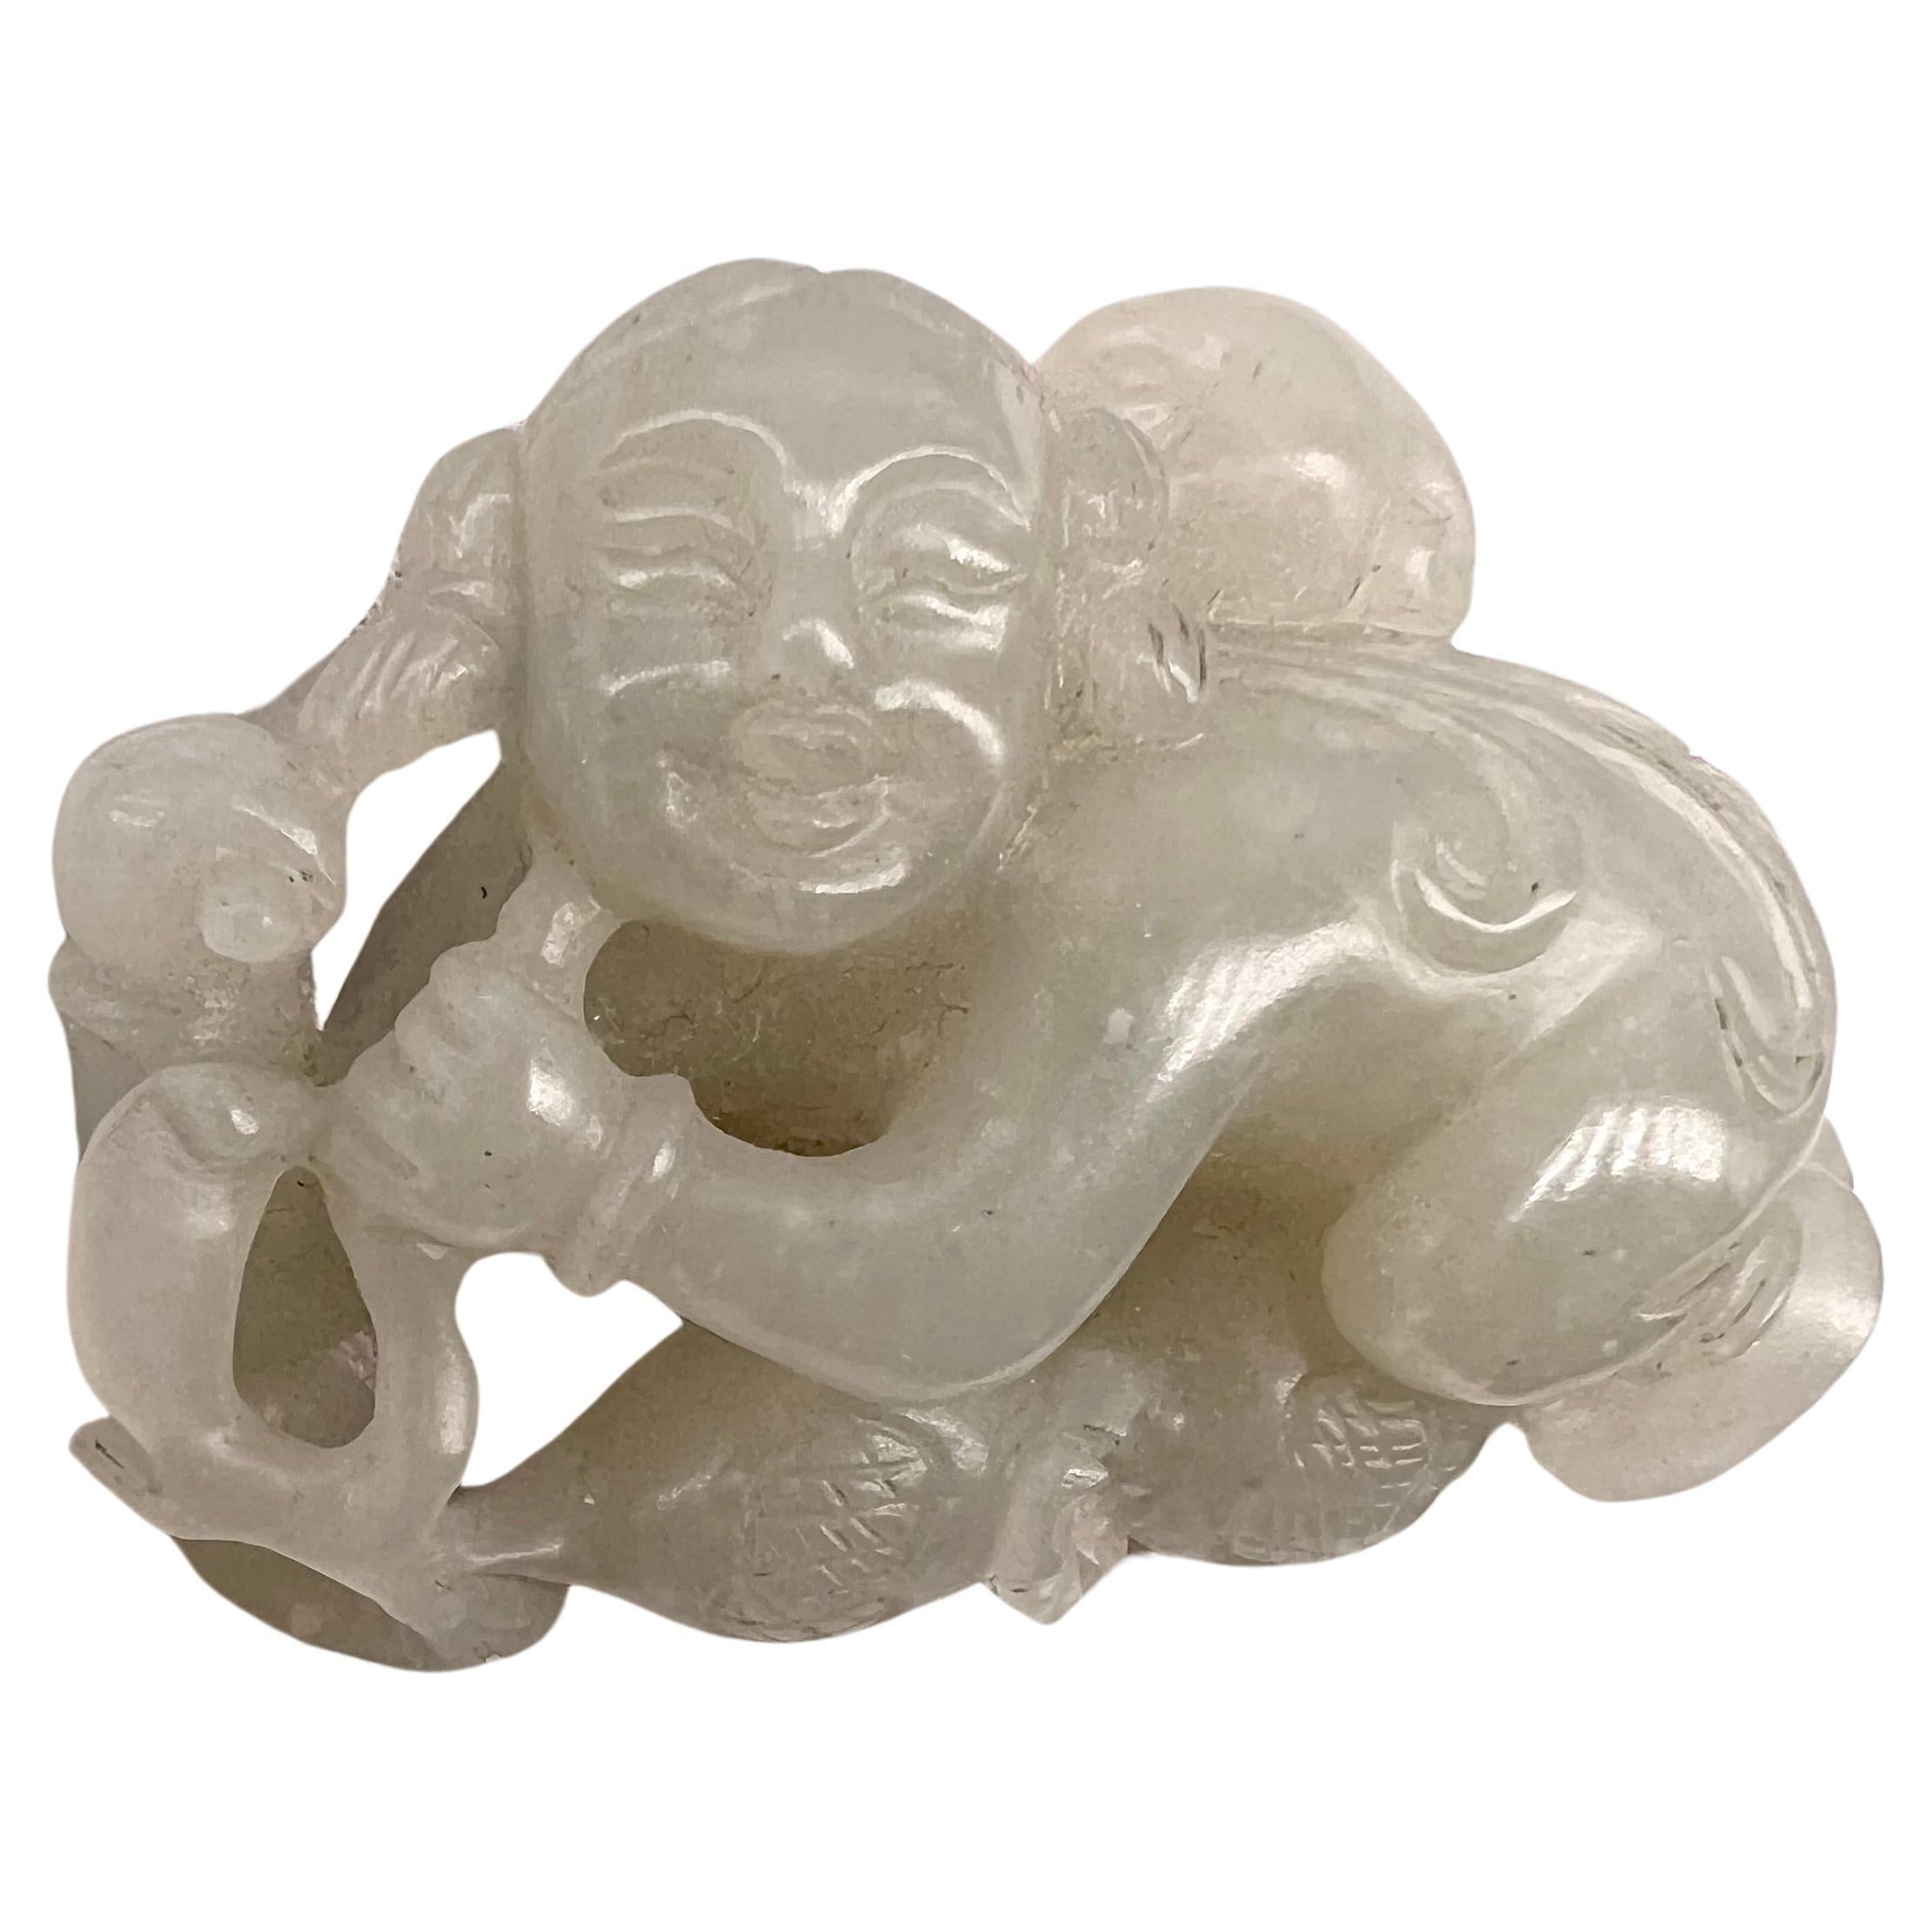 What do jade carvings mean?